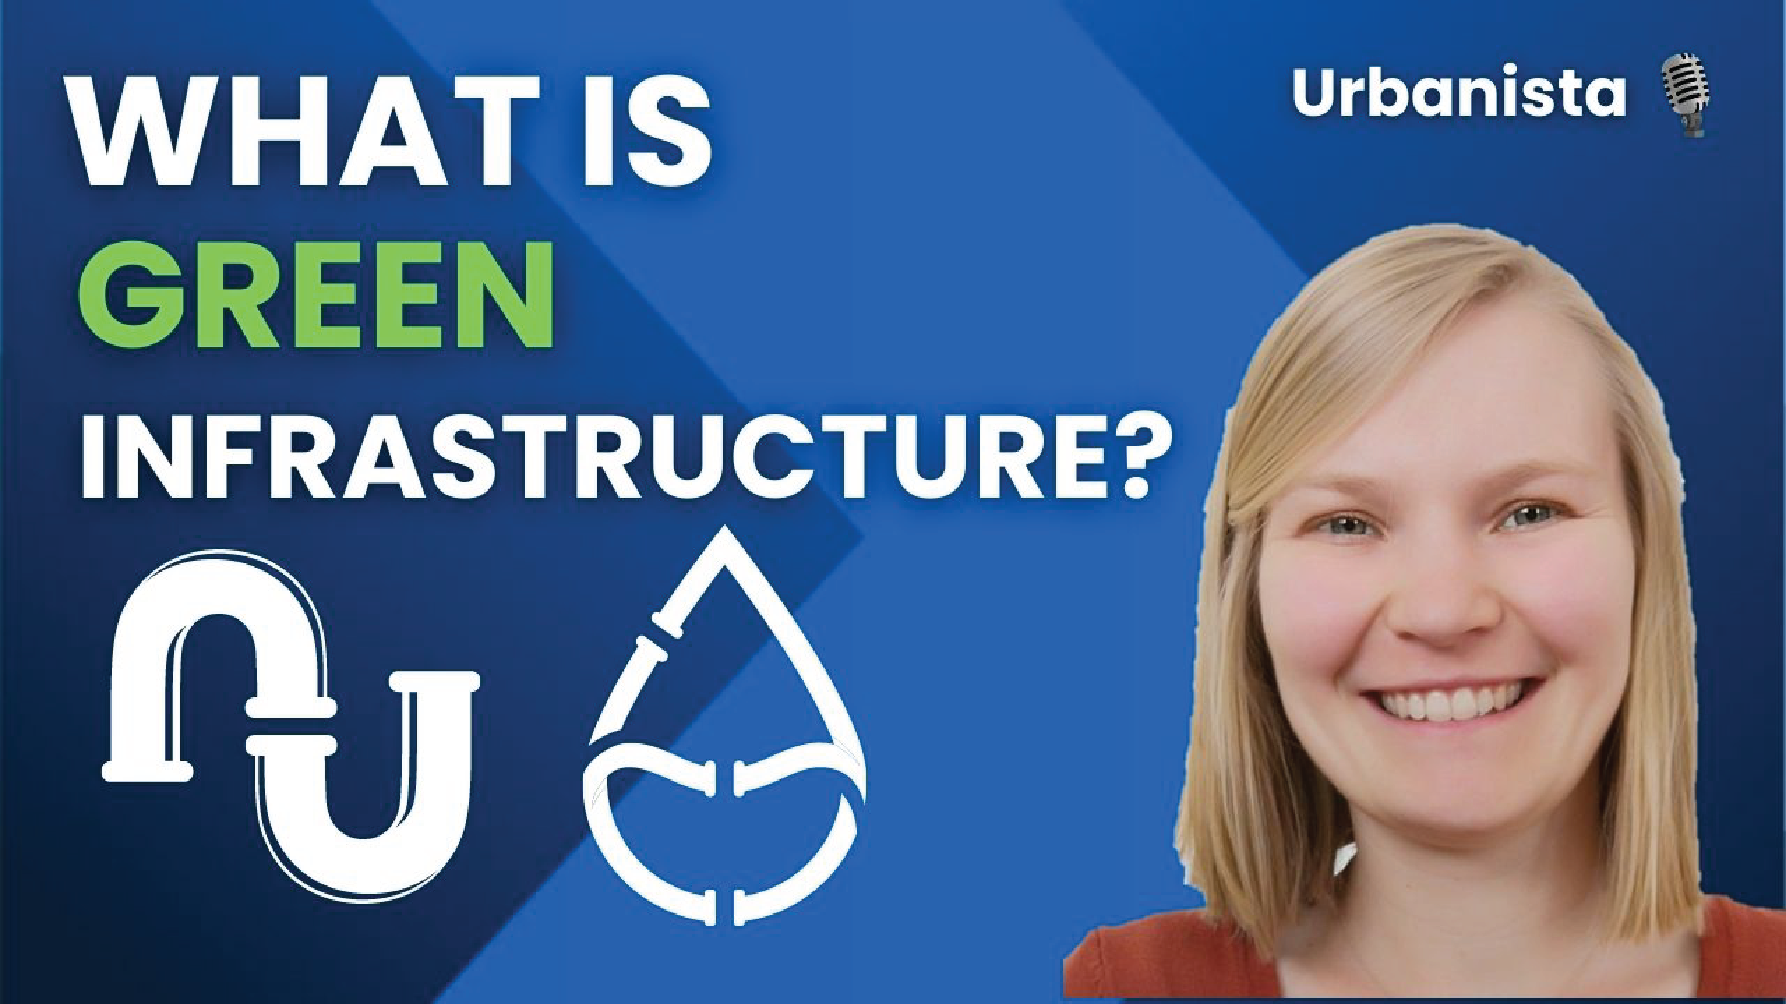 How to go from gray to green infrastructure?